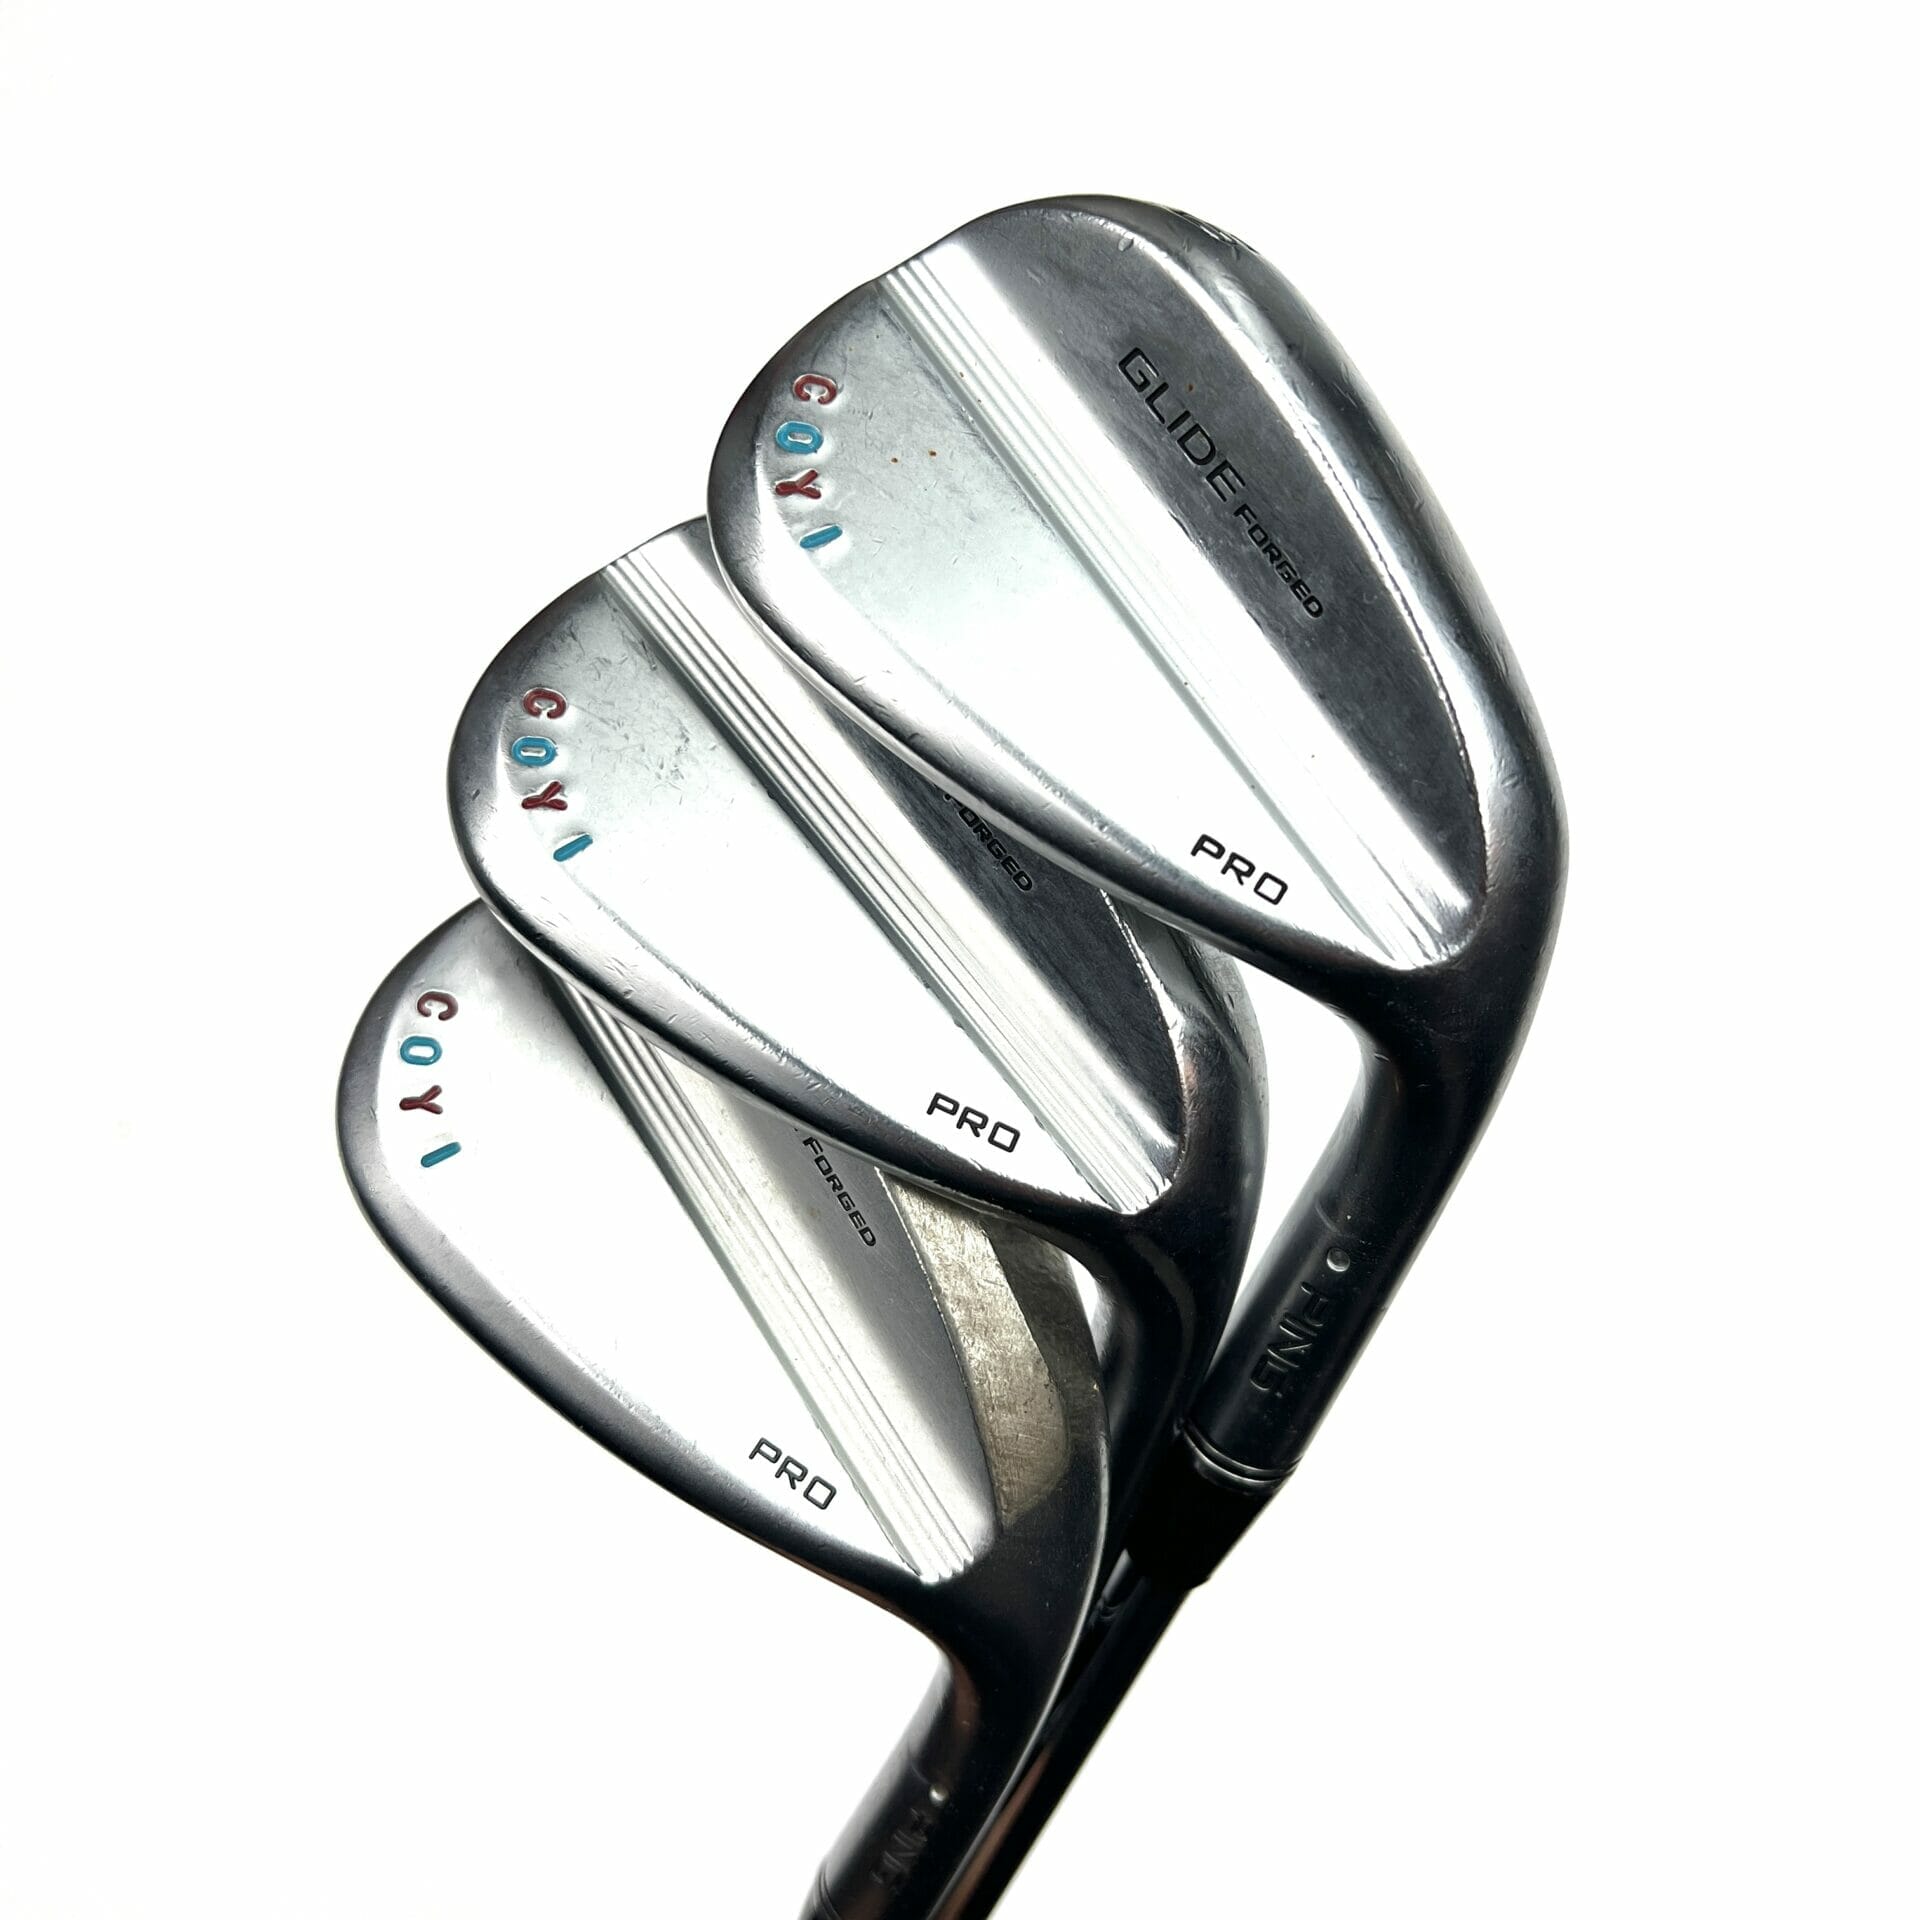 Ping Glide Forged Pro Wedge Set / 50, 54, 58 Degree / Project X X